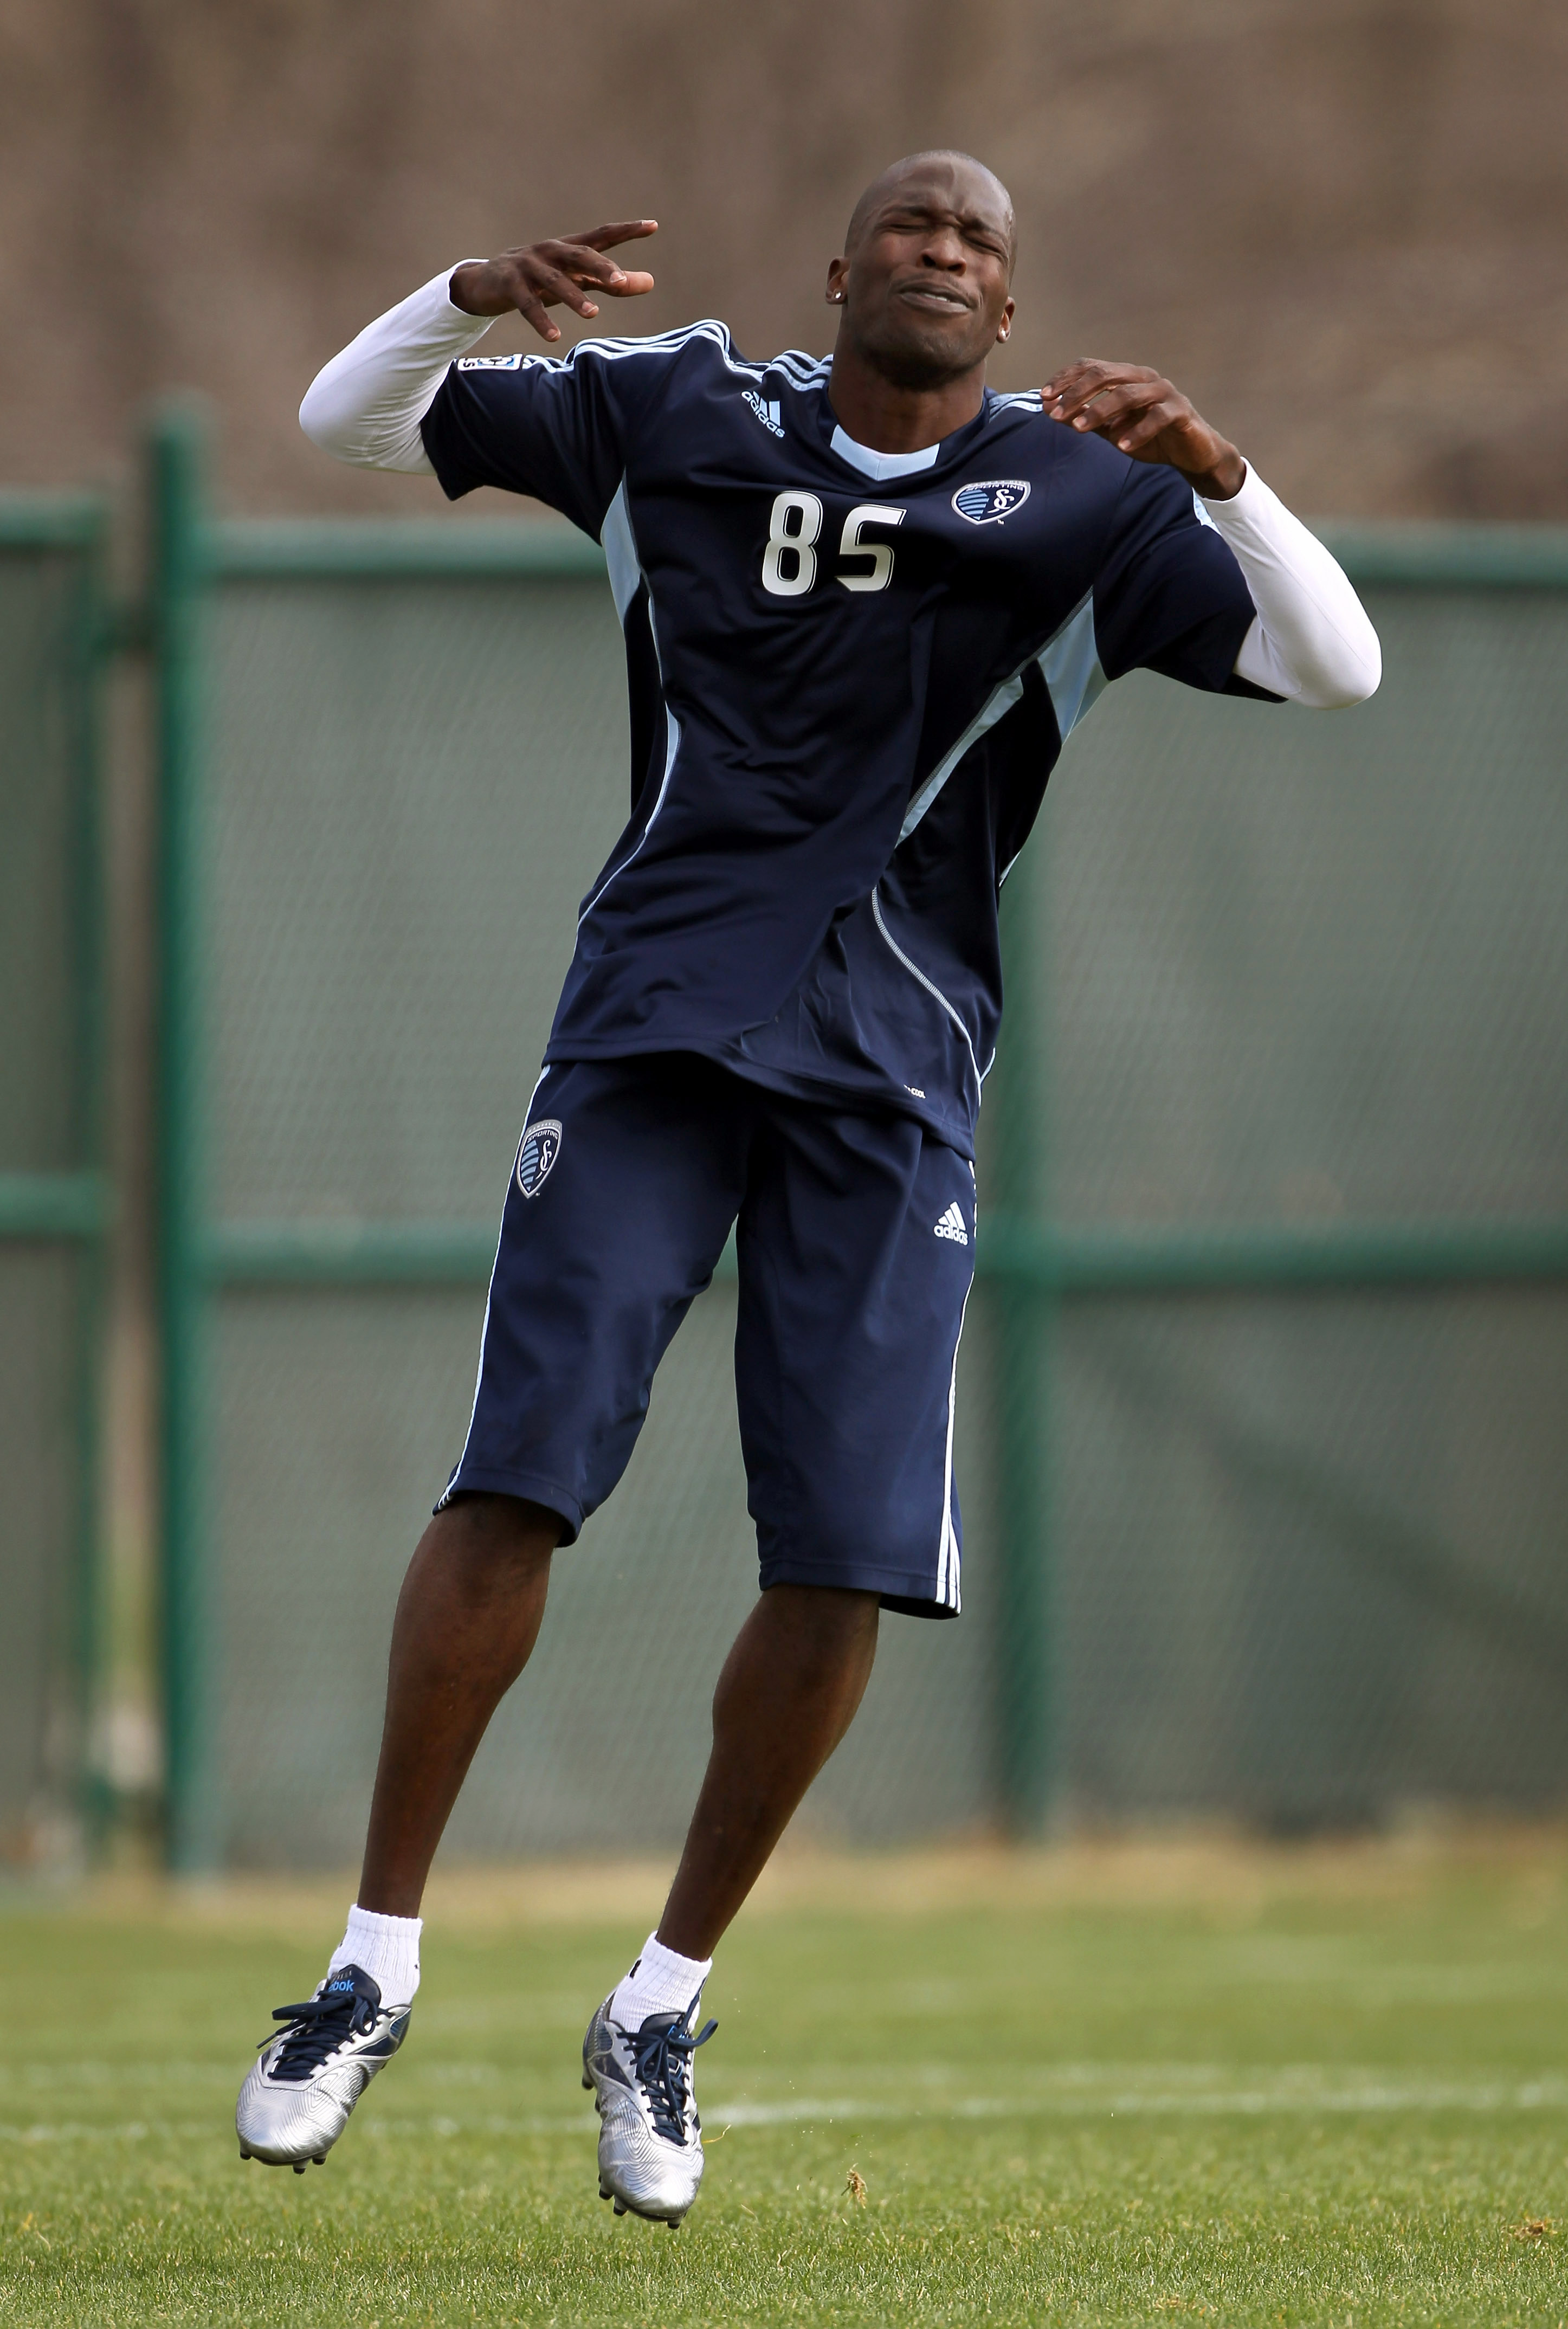 KANSAS CITY, MO - MARCH 23:  Chad Ochocinco reacts during his tryout with Sporting Kansas City on March 23, 2011 in Kansas City, Missouri.  (Photo by Jamie Squire/Getty Images)